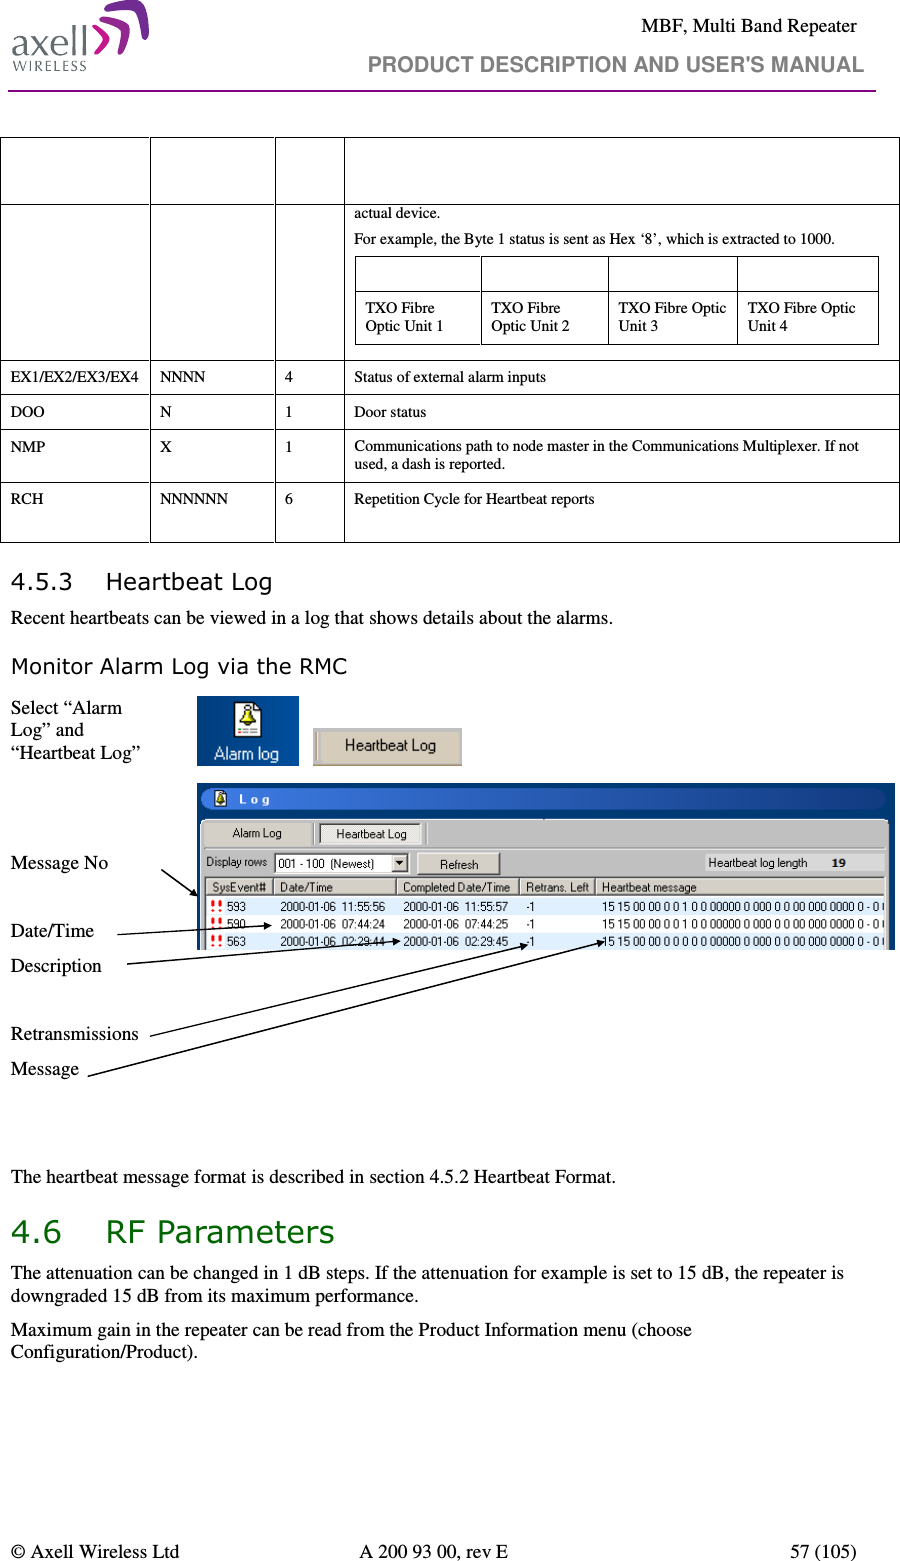     MBF, Multi Band Repeater                                     PRODUCT DESCRIPTION AND USER&apos;S MANUAL   © Axell Wireless Ltd  A 200 93 00, rev E  57 (105)  Field   Format  # of char Description       actual device. For example, the Byte 1 status is sent as Hex ‘8’, which is extracted to 1000. Bit 3  Bit 2  Bit 1  Bit 0 TXO Fibre Optic Unit 1 TXO Fibre Optic Unit 2 TXO Fibre Optic Unit 3 TXO Fibre Optic Unit 4  EX1/EX2/EX3/EX4  NNNN  4  Status of external alarm inputs DOO  N  1  Door status NMP  X  1  Communications path to node master in the Communications Multiplexer. If not used, a dash is reported. RCH  NNNNNN  6  Repetition Cycle for Heartbeat reports  4.5.3 Heartbeat Log Recent heartbeats can be viewed in a log that shows details about the alarms. Monitor Alarm Log via the RMC Select “Alarm Log” and “Heartbeat Log”         Message No  Date/Time Description  Retransmissions Message     The heartbeat message format is described in section 4.5.2 Heartbeat Format. 4.6 RF Parameters The attenuation can be changed in 1 dB steps. If the attenuation for example is set to 15 dB, the repeater is downgraded 15 dB from its maximum performance.  Maximum gain in the repeater can be read from the Product Information menu (choose Configuration/Product). 